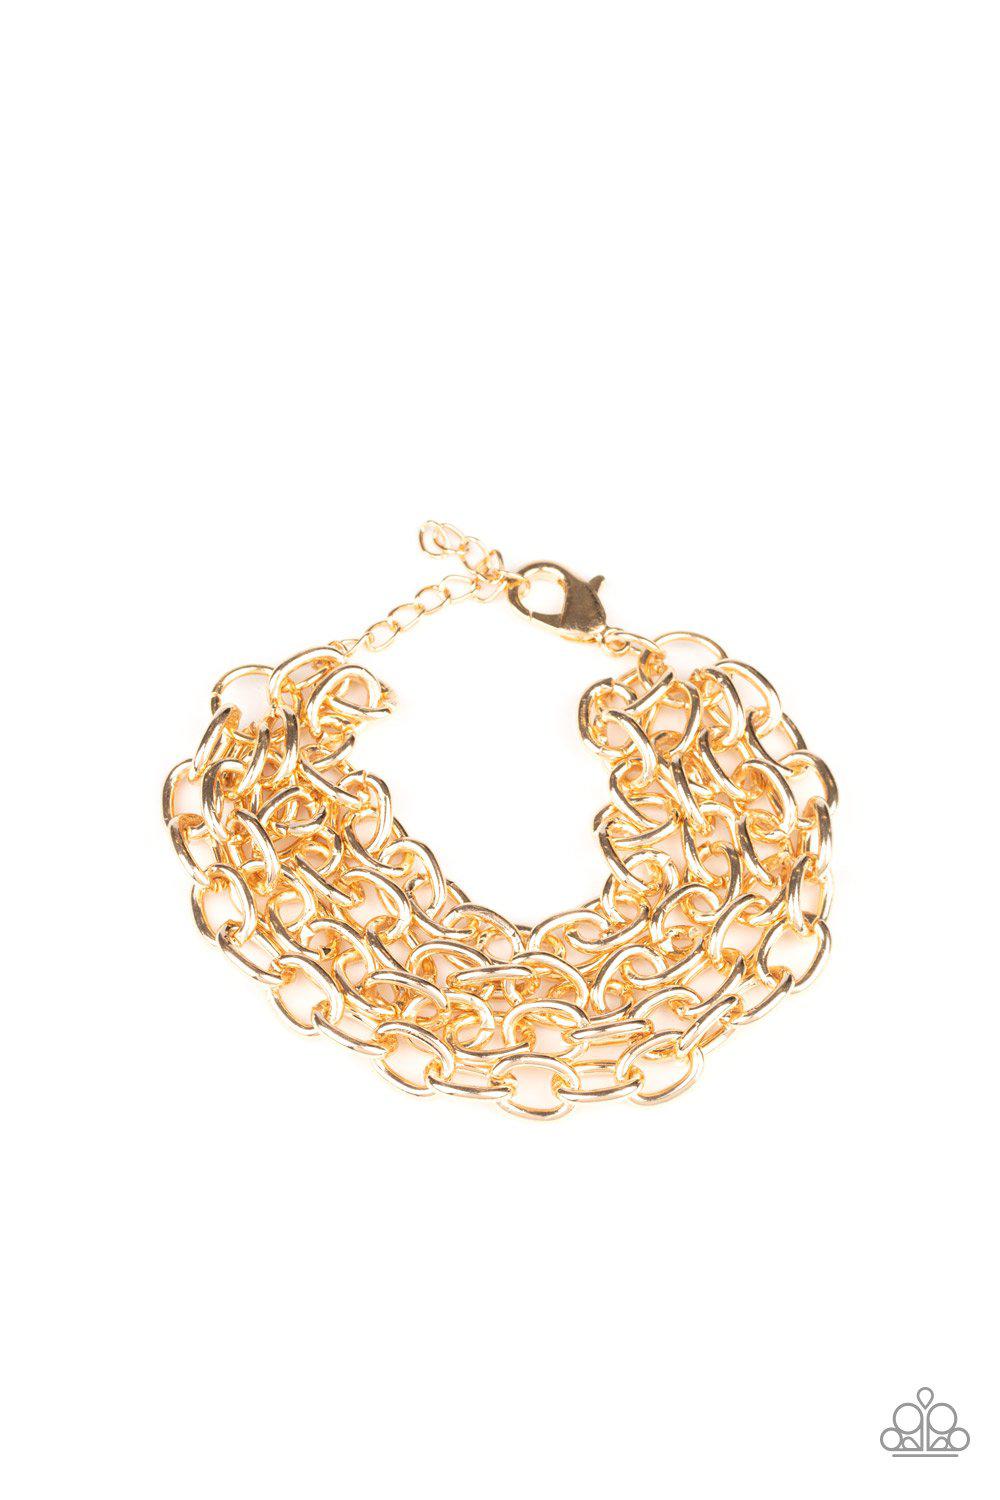 Fast Ball Gold Chain Bracelet - Paparazzi Accessories-CarasShop.com - $5 Jewelry by Cara Jewels